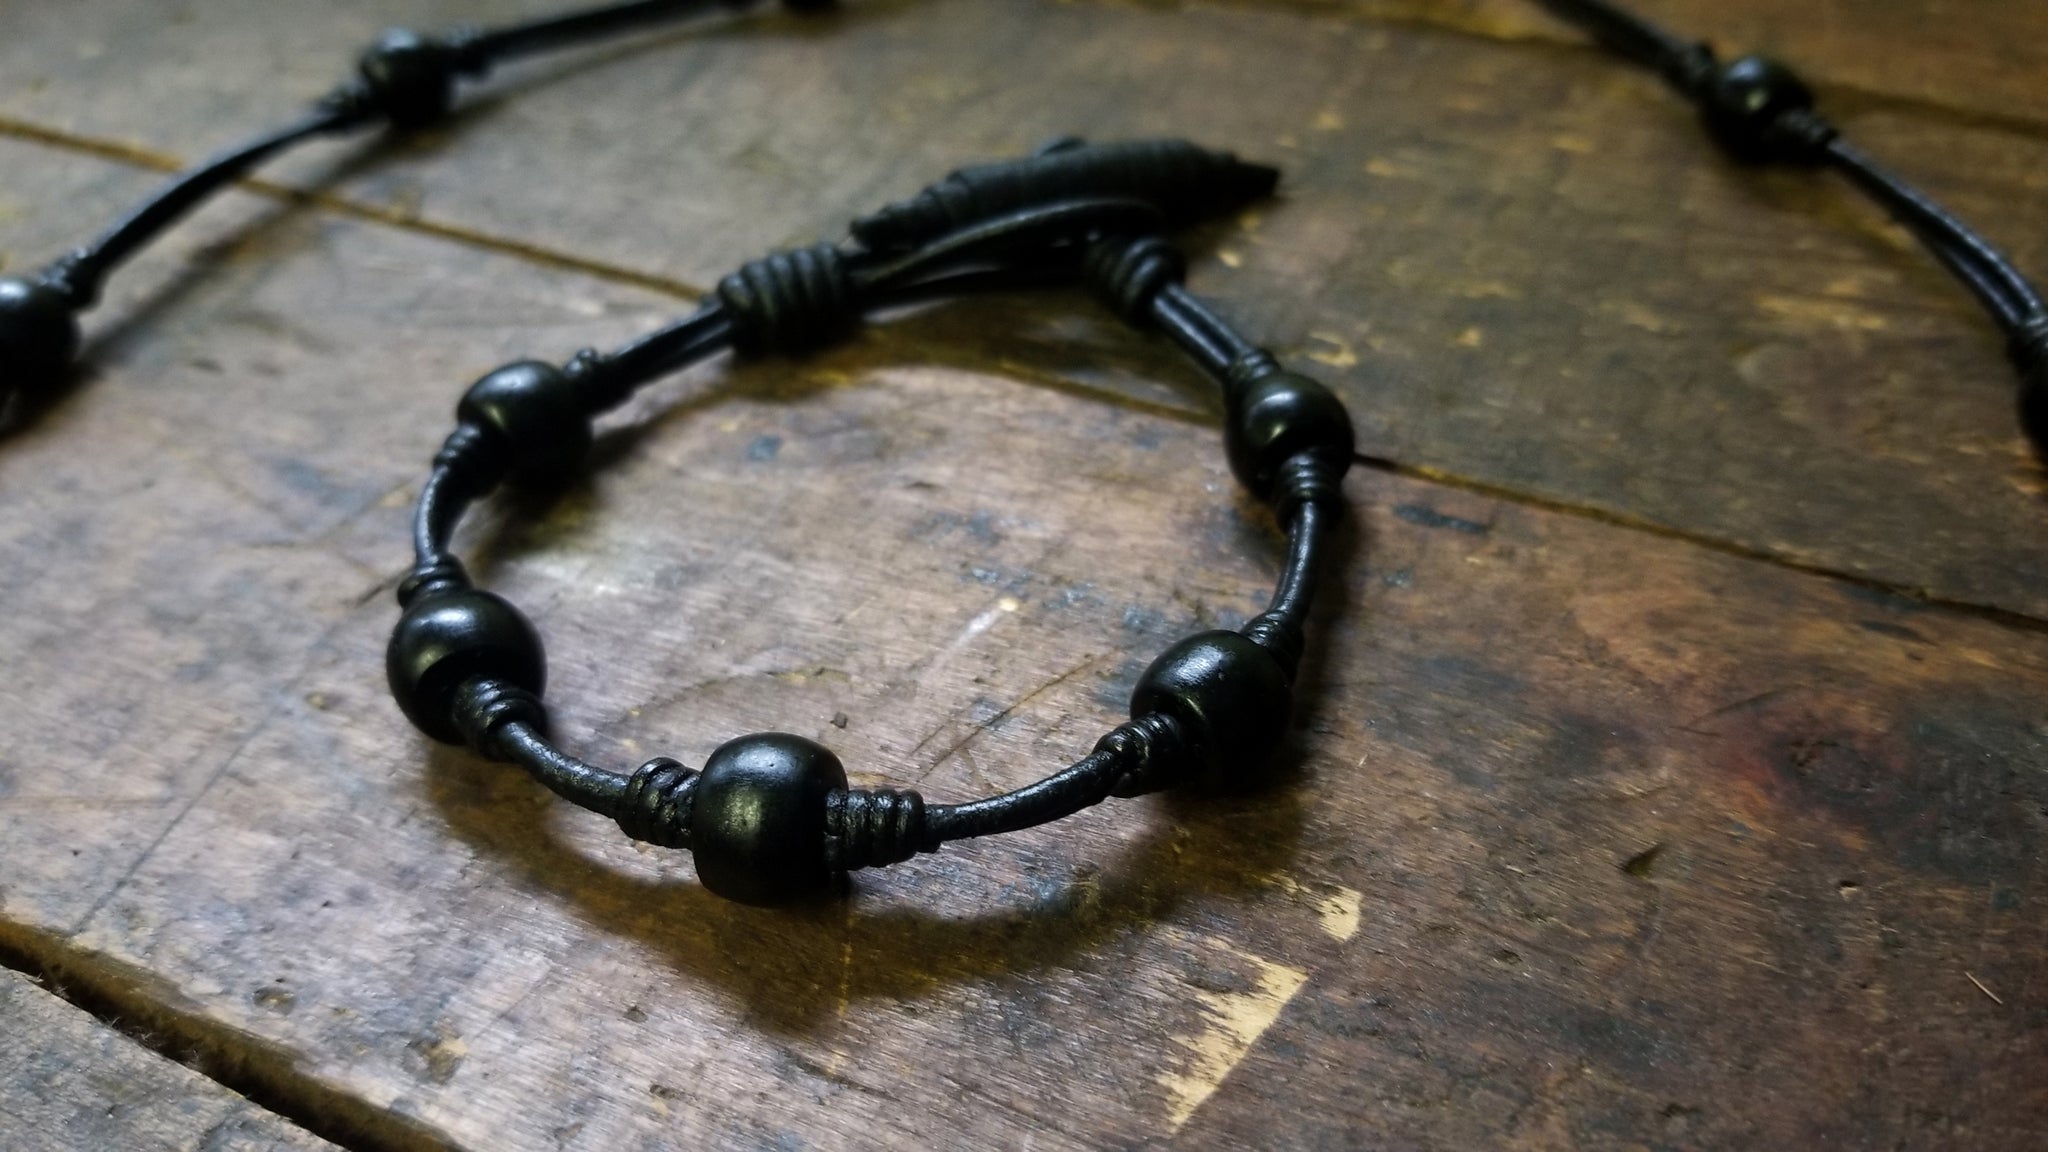 Chuma Bracelet; black leather cord with black onyx African Trade Beads, Bison Leather Button and Loop Clasp